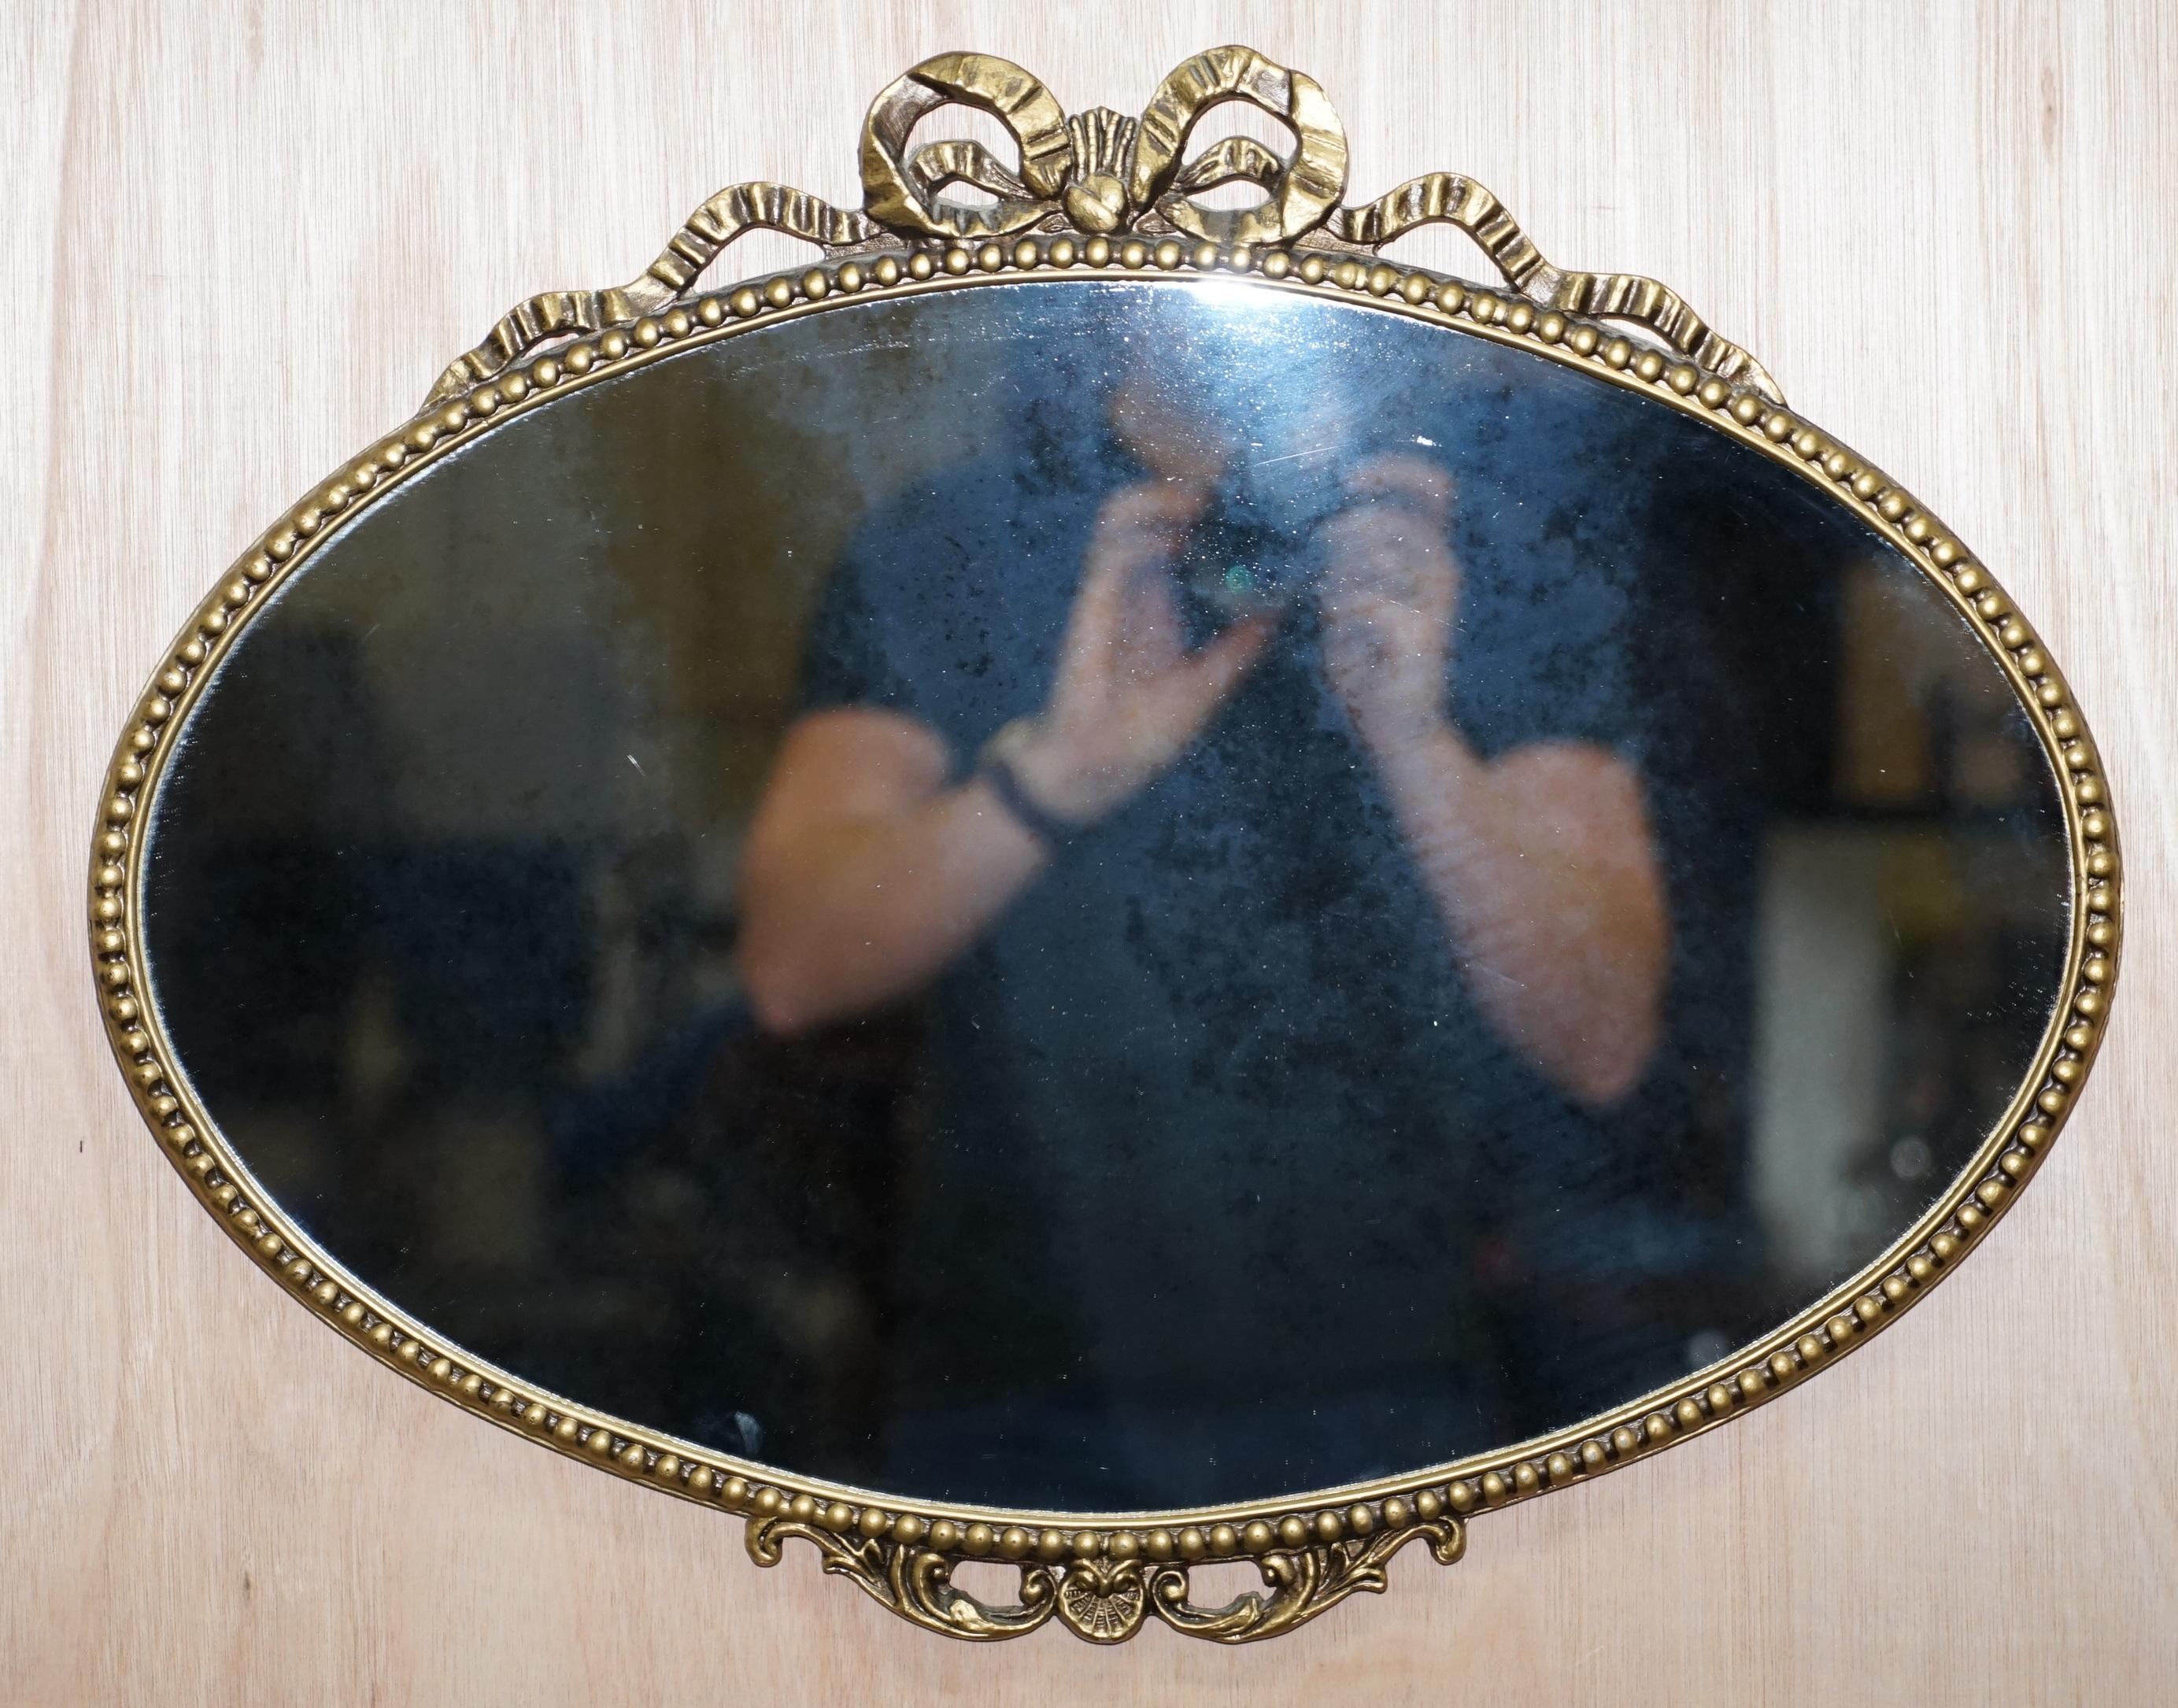 Wimbledon-Furniture

Wimbledon-Furniture is delighted to offer for sale this stunning Shield shaped rectangle mirror with bevelled edge circa 1940

Please note the delivery fee listed is just a guide, it covers within the M25 only, for an